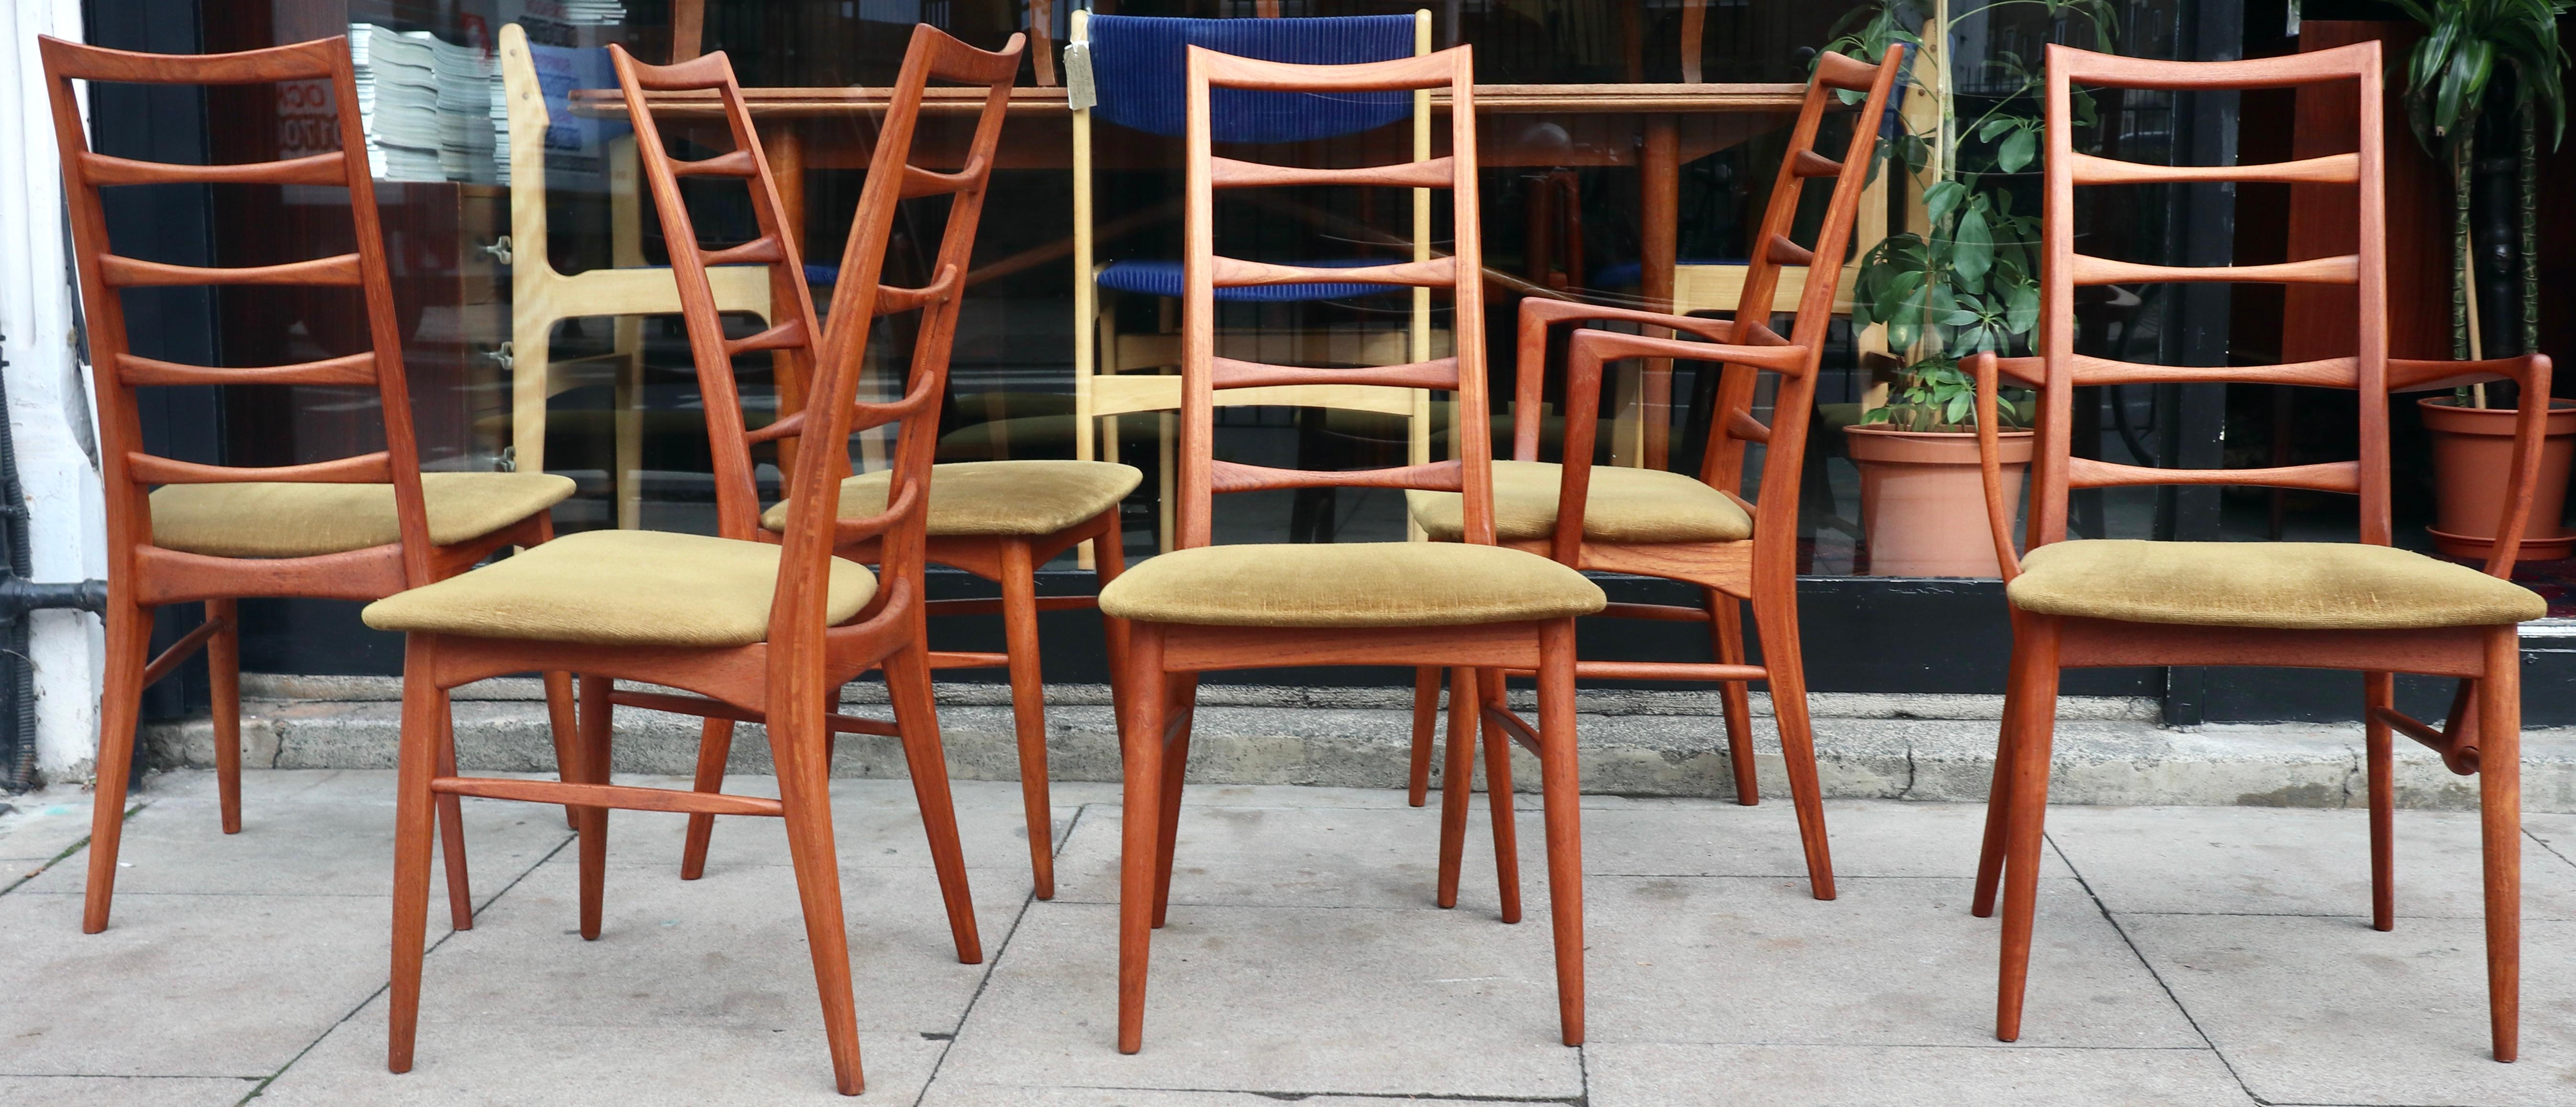 Six Danish 1960s 'Lis' Model teak dining chairs by Niels Koefoed for Hornslet  For Sale 6